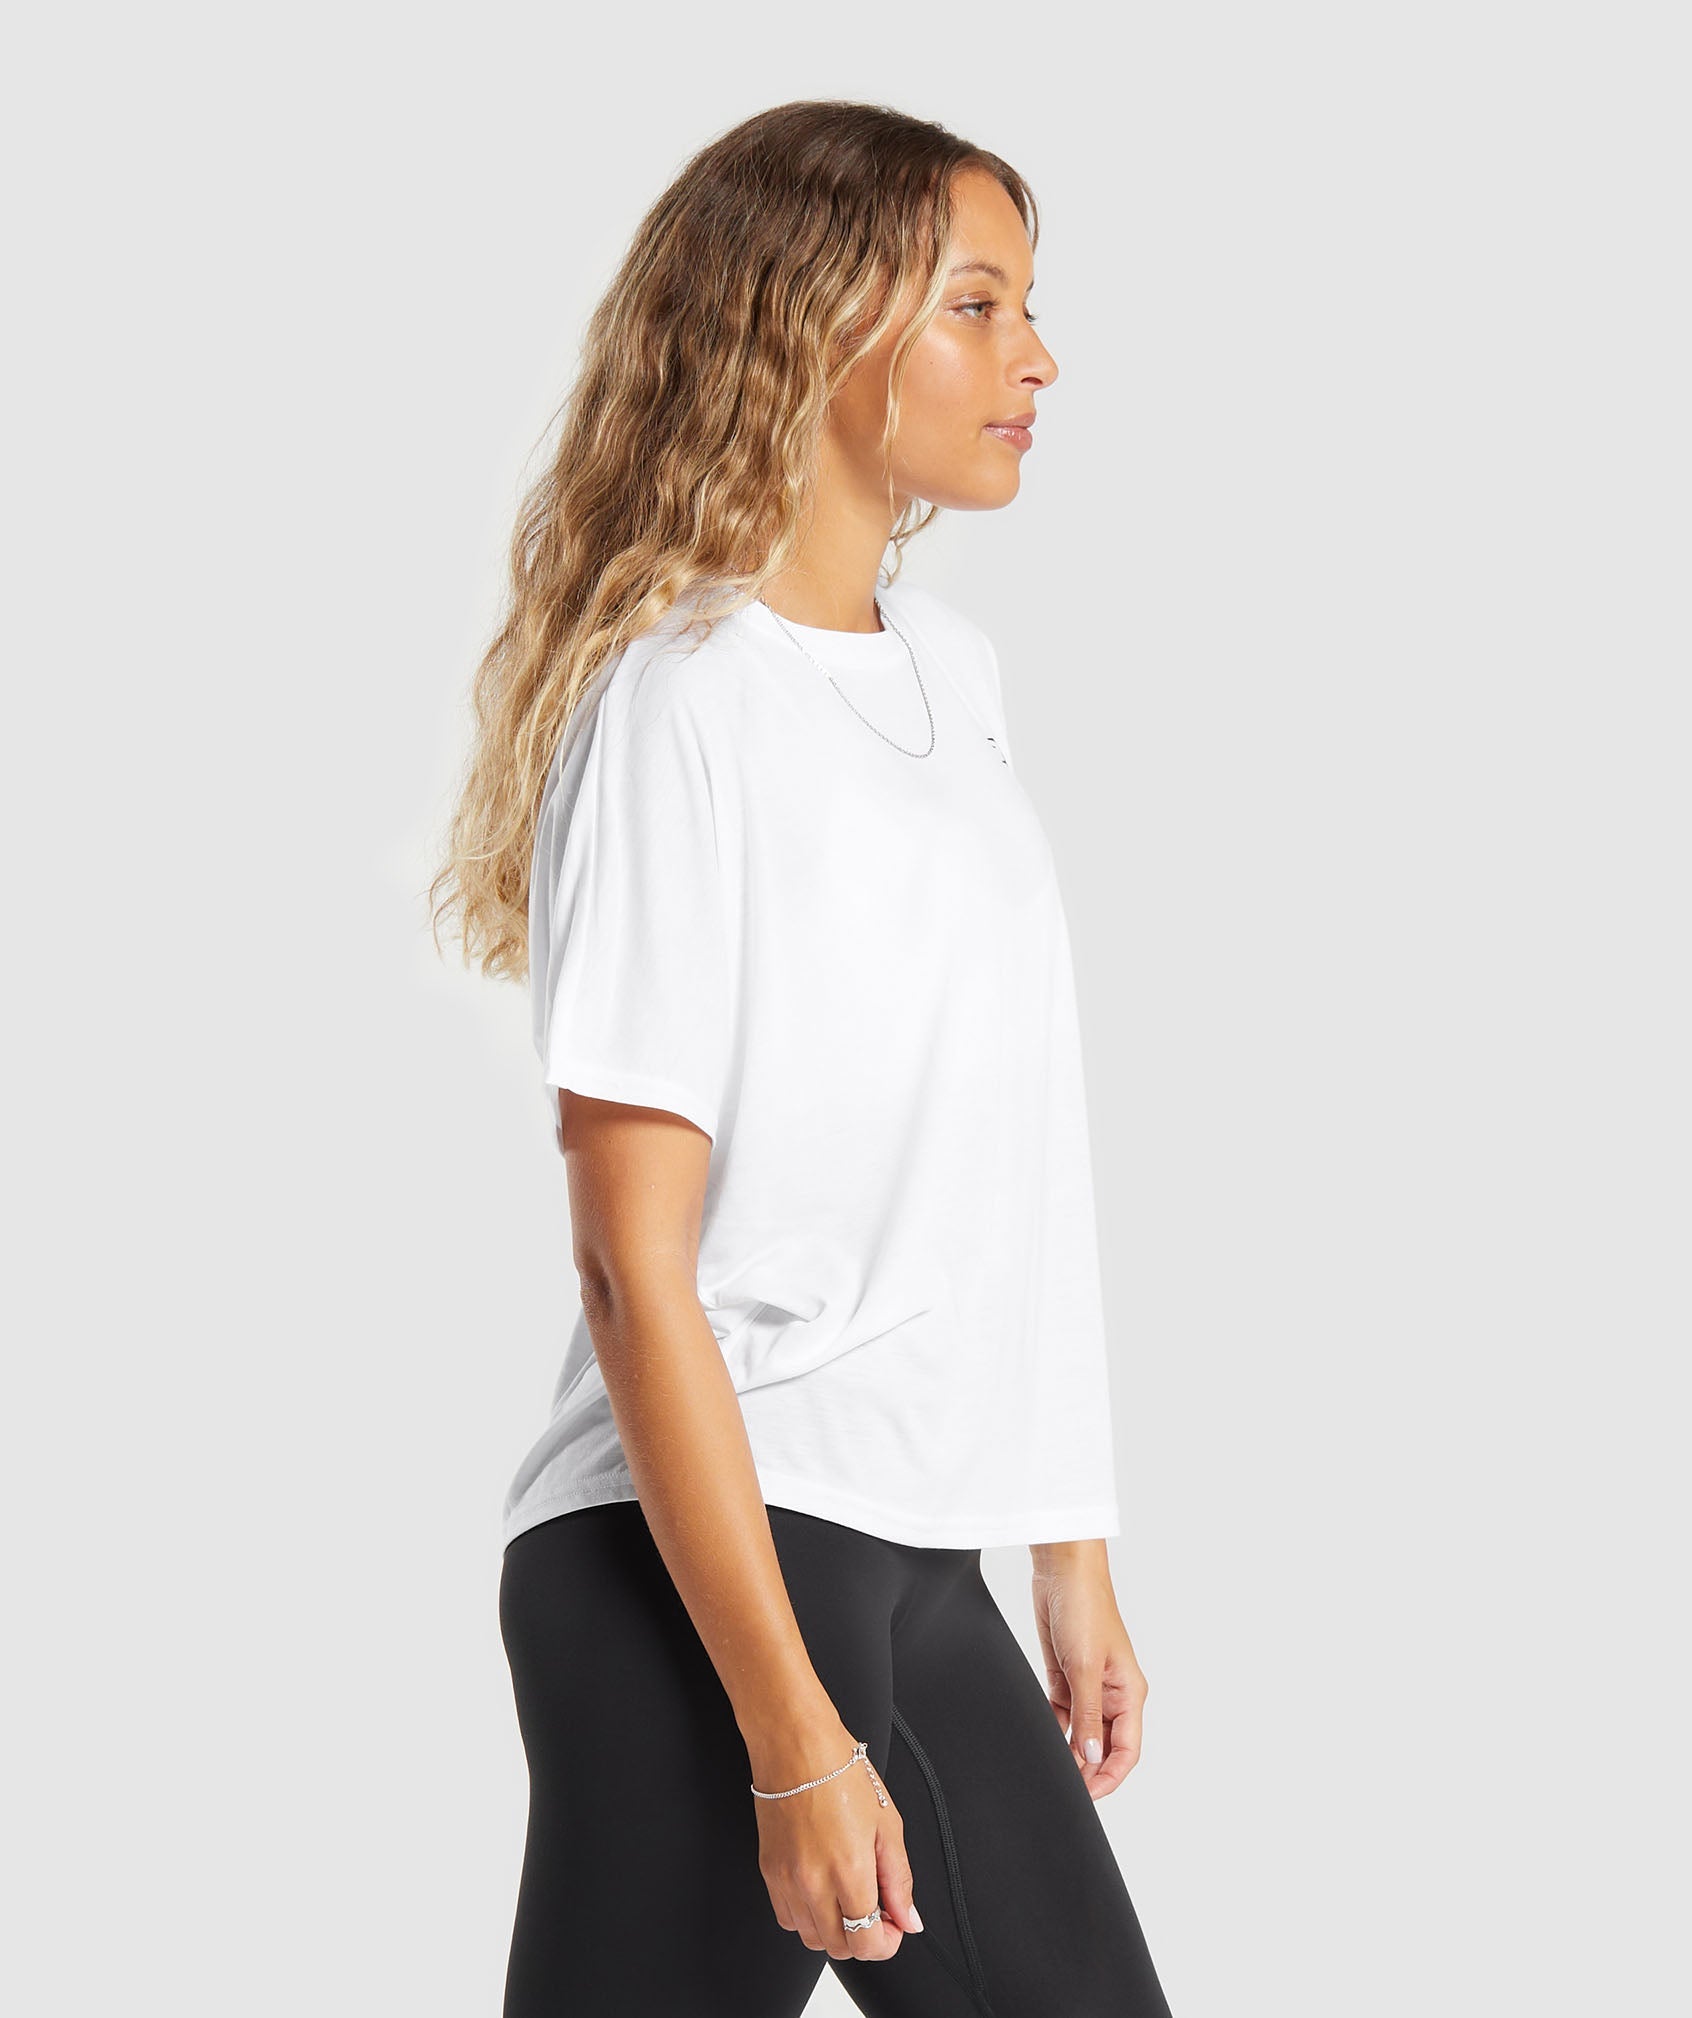 Super Soft T-Shirt in White - view 3